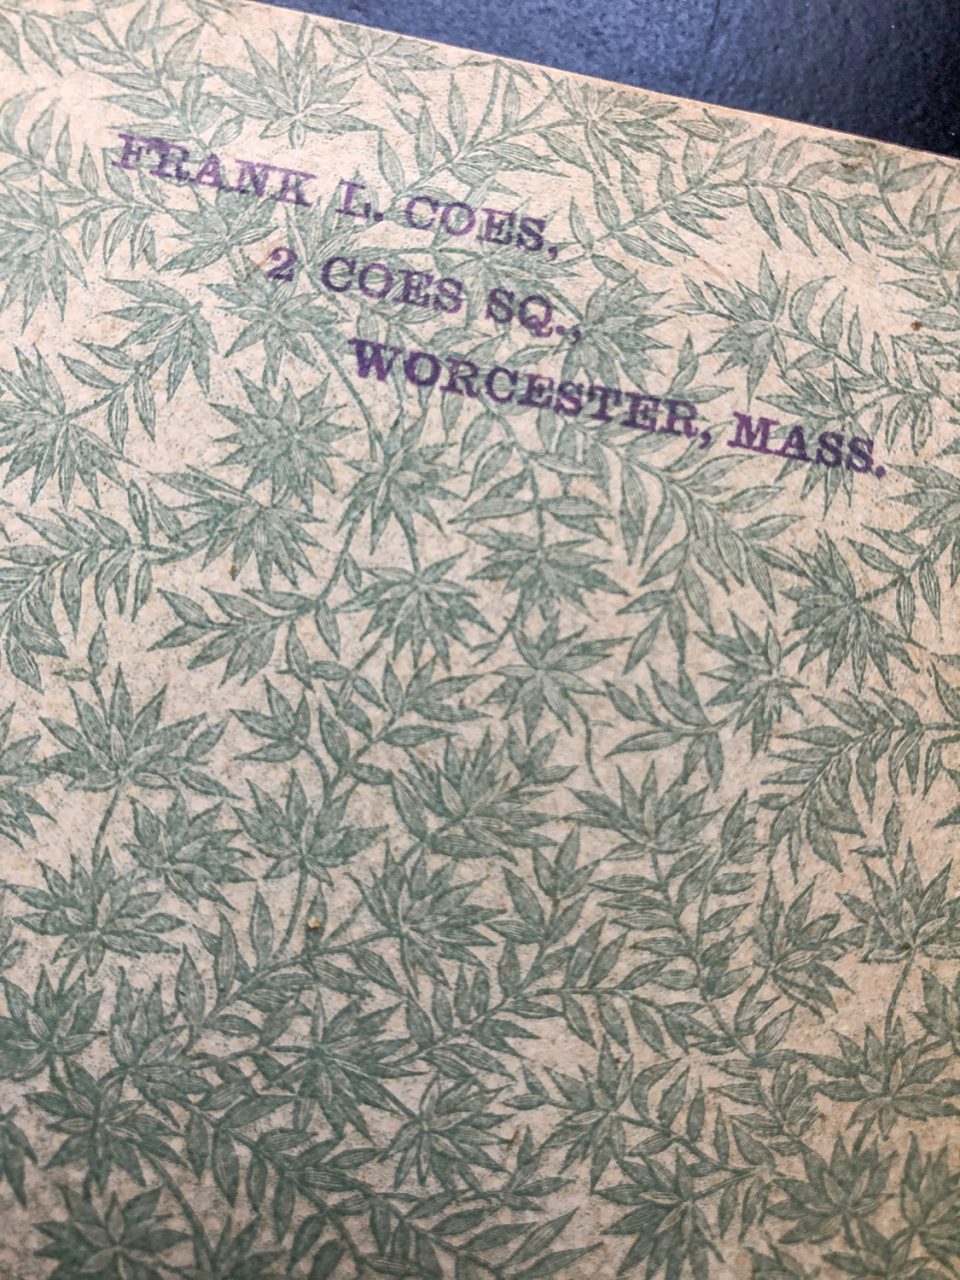 The previous owner of this book was Frank L. Coes, who lived at 2 Coes Square in Worcester, Massachusetts.  He was at that address in 1940 according to the U.S. Census. Does anyone have information about Mr. Coes?